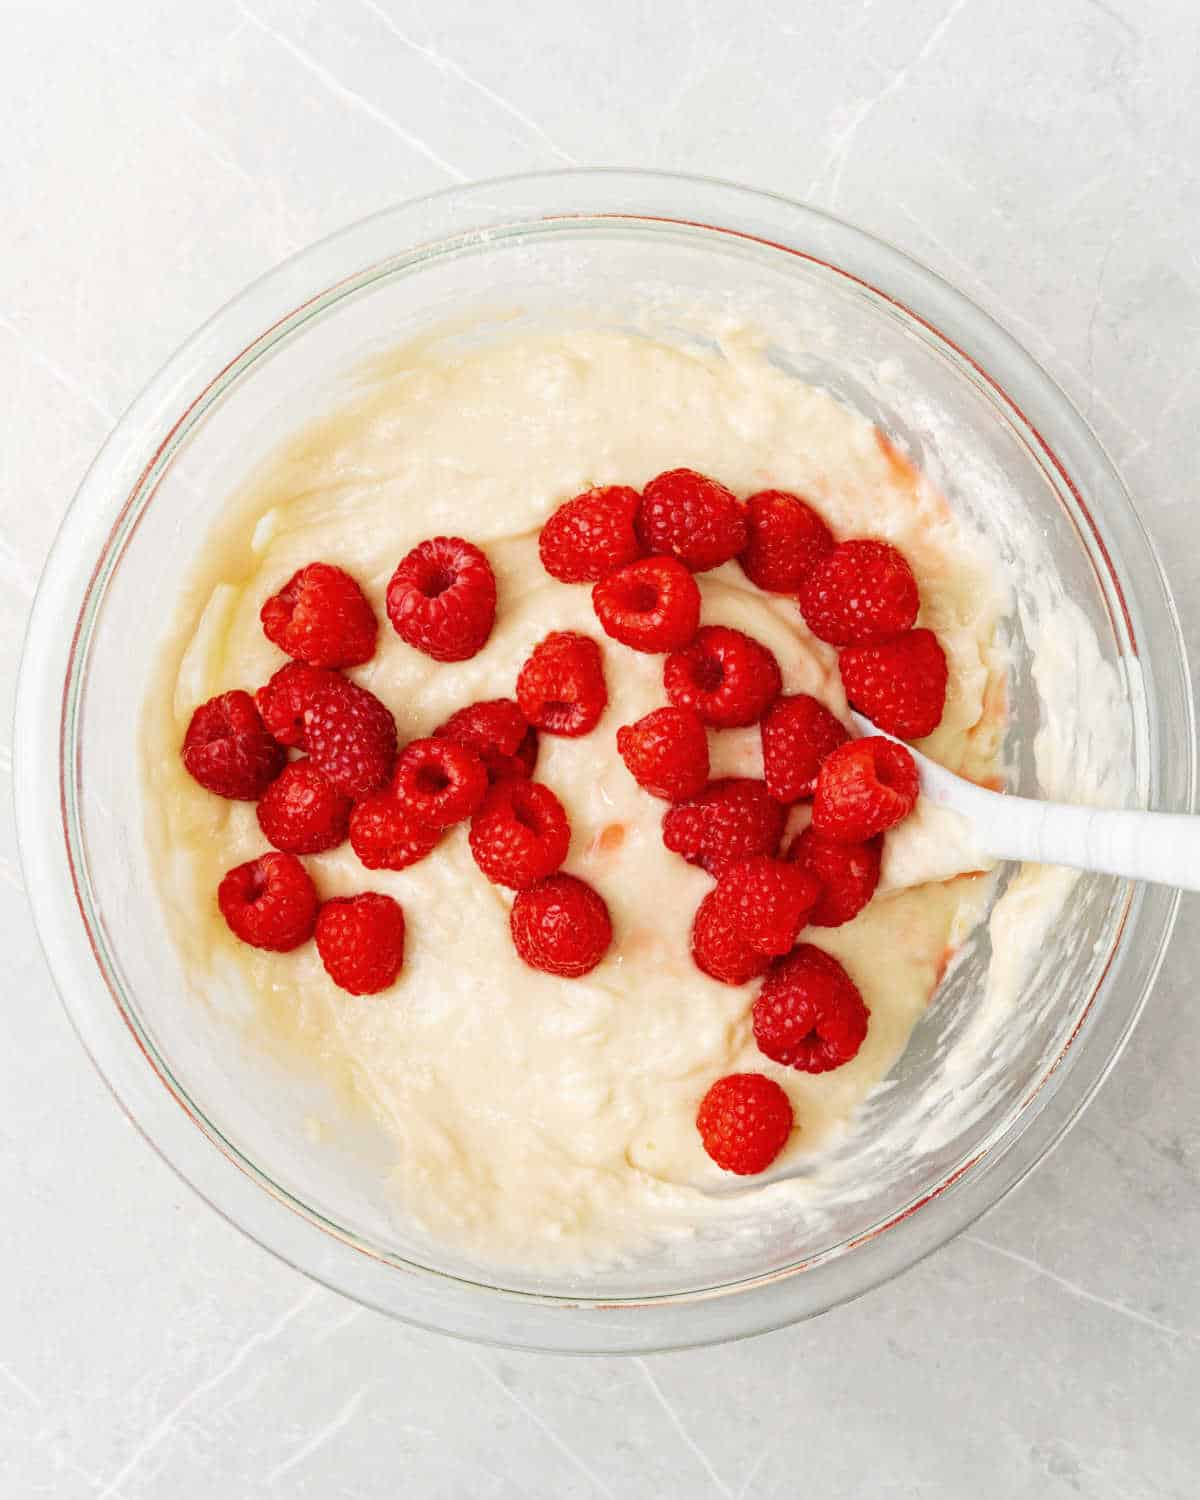 Fresh raspberries added to muffin batter in a glass bowl with a spatula. Light grey surface.